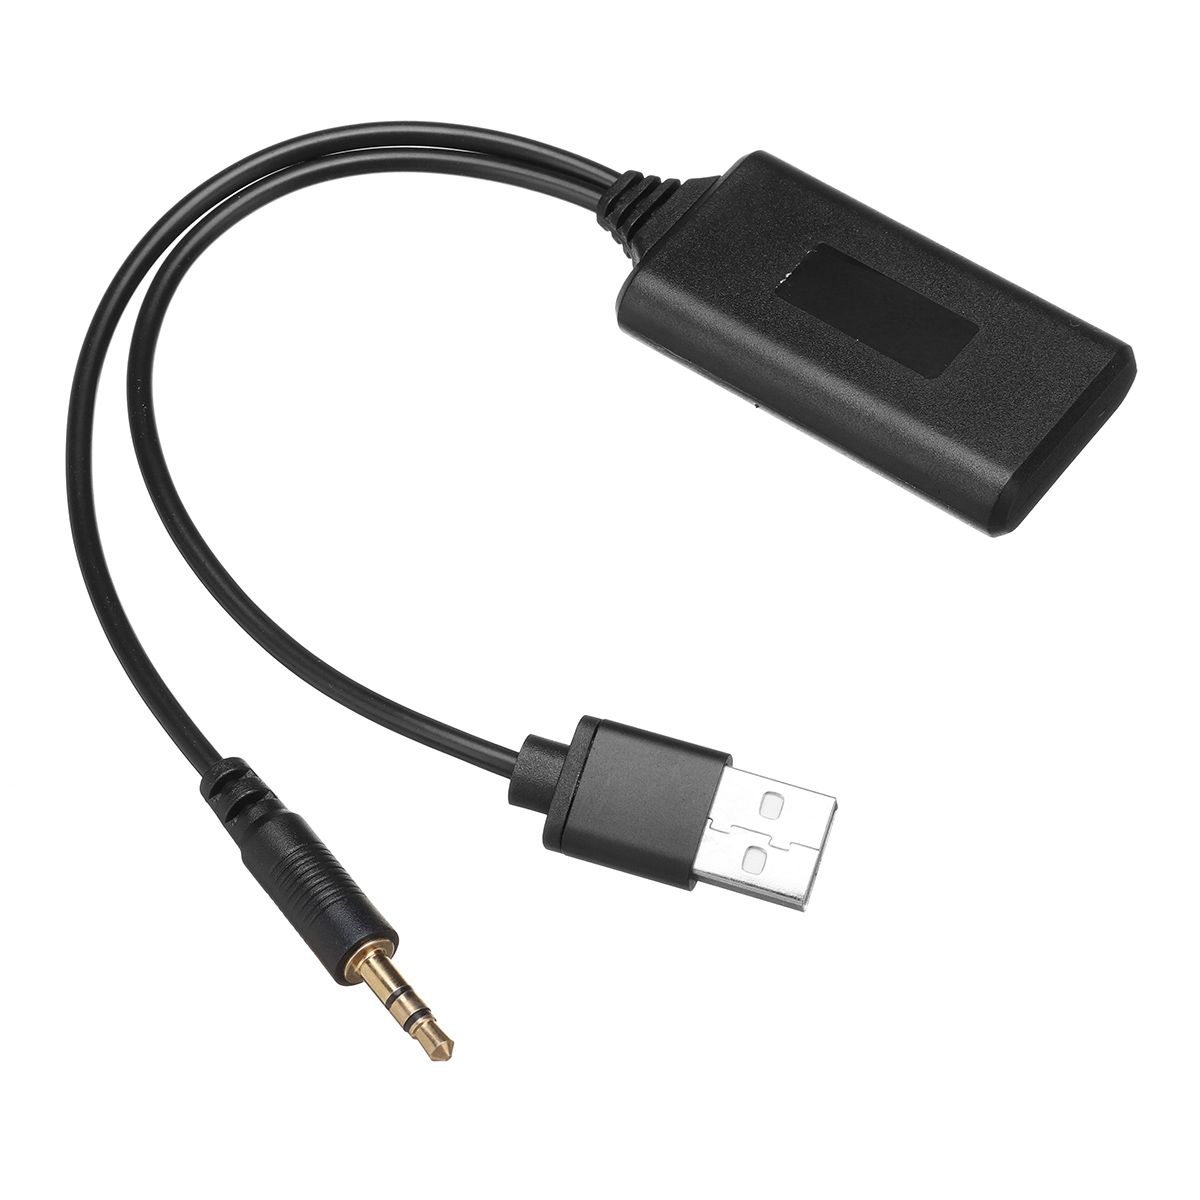 Universal-12V-Car-bluetooth-Module-Adapter-AUX-IN-AUX-Audio-Cable-Wireless-Radio-Stereo-USB-35MM-Jac-1526051